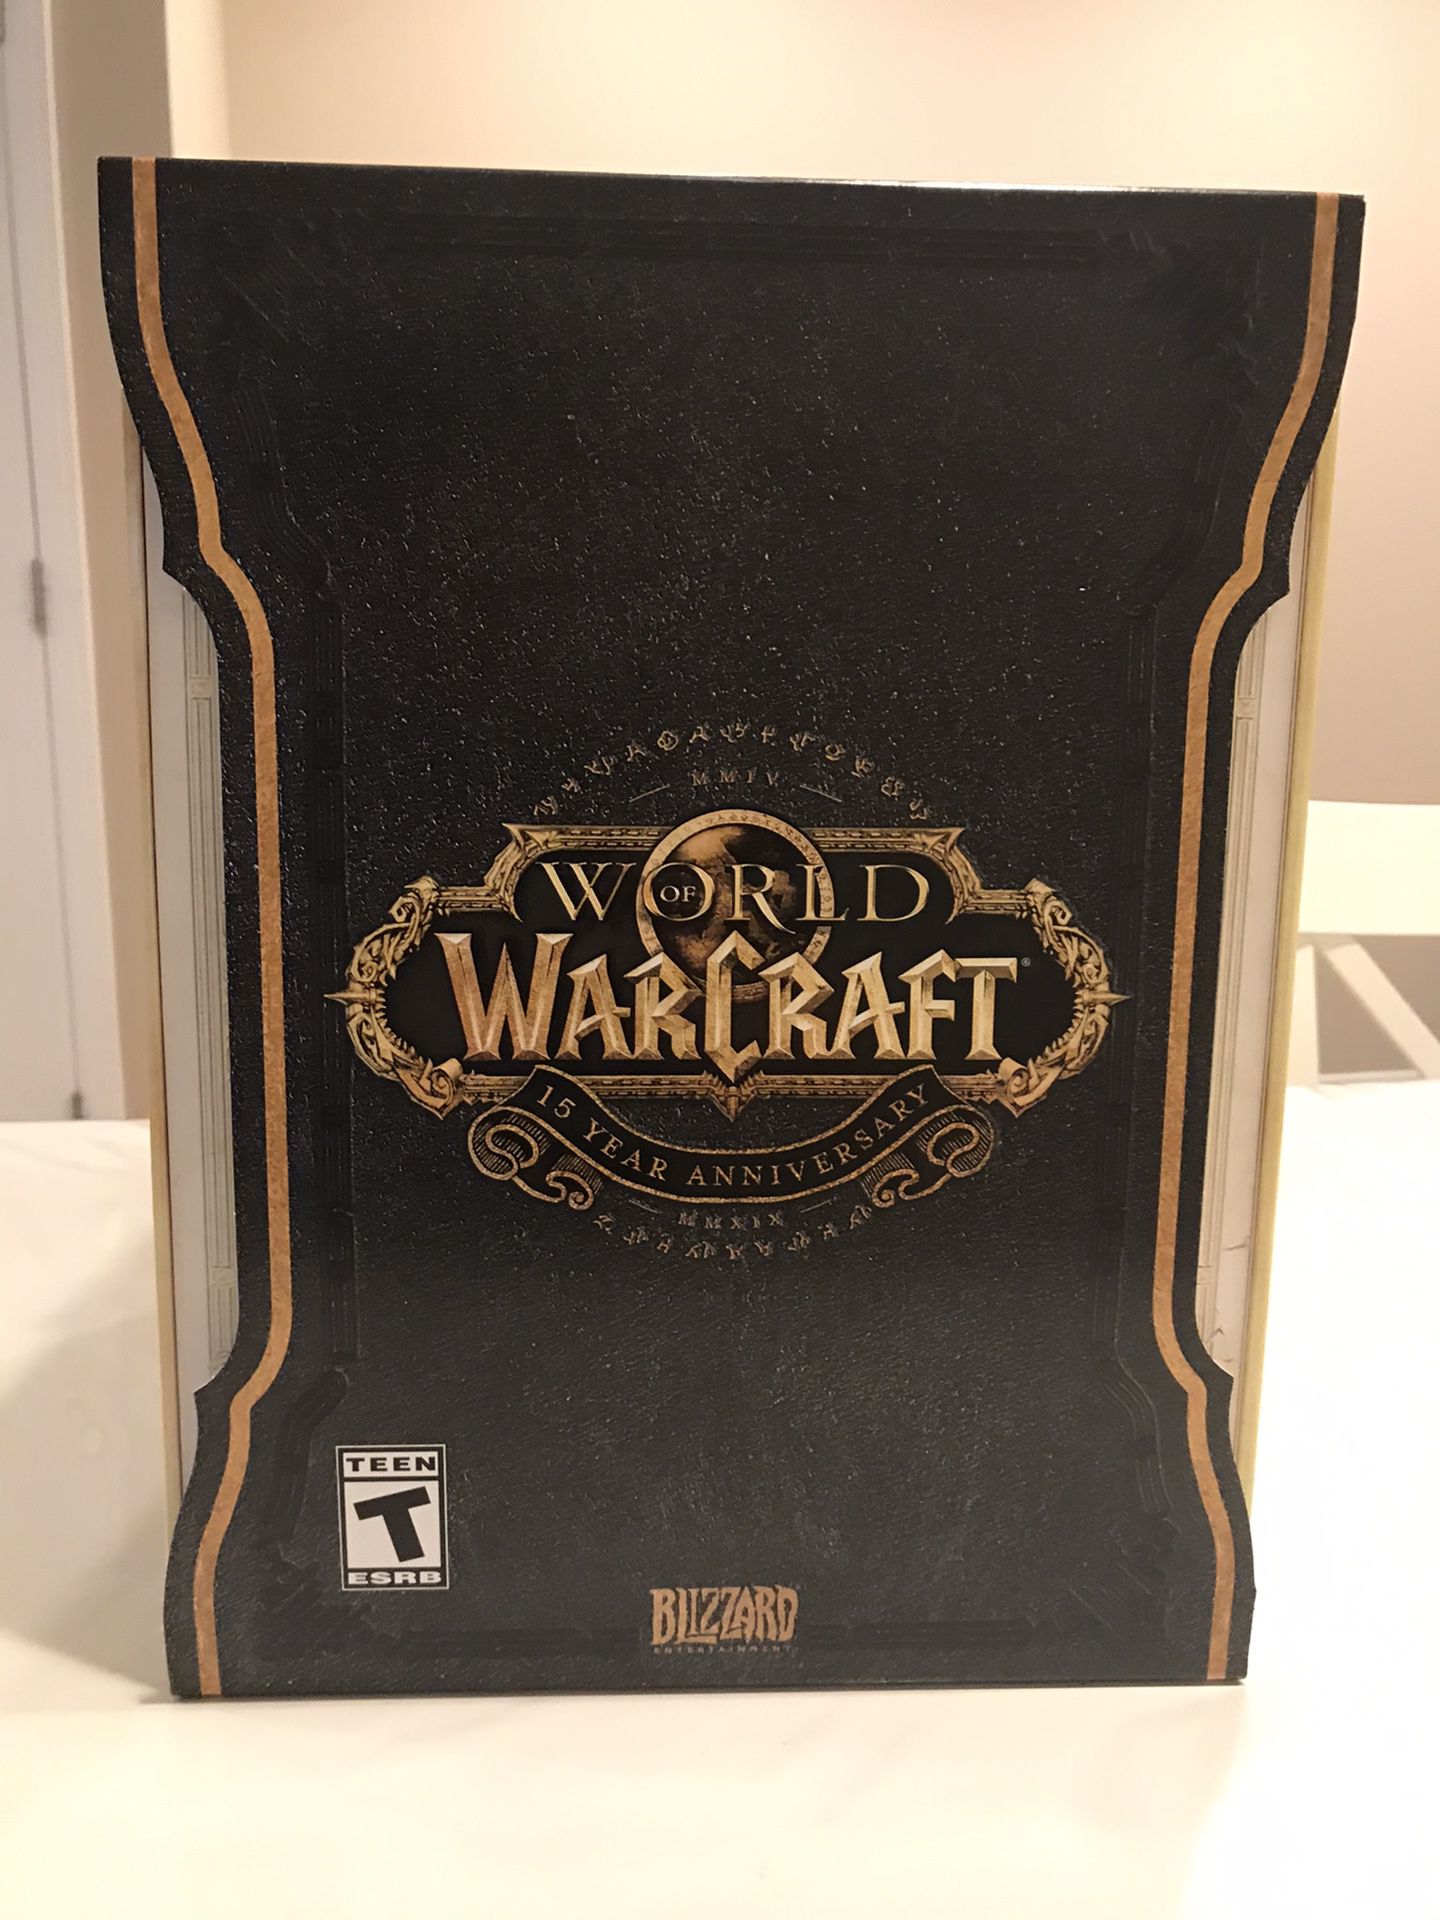 World of Warcraft 15th anniversary collectors edition